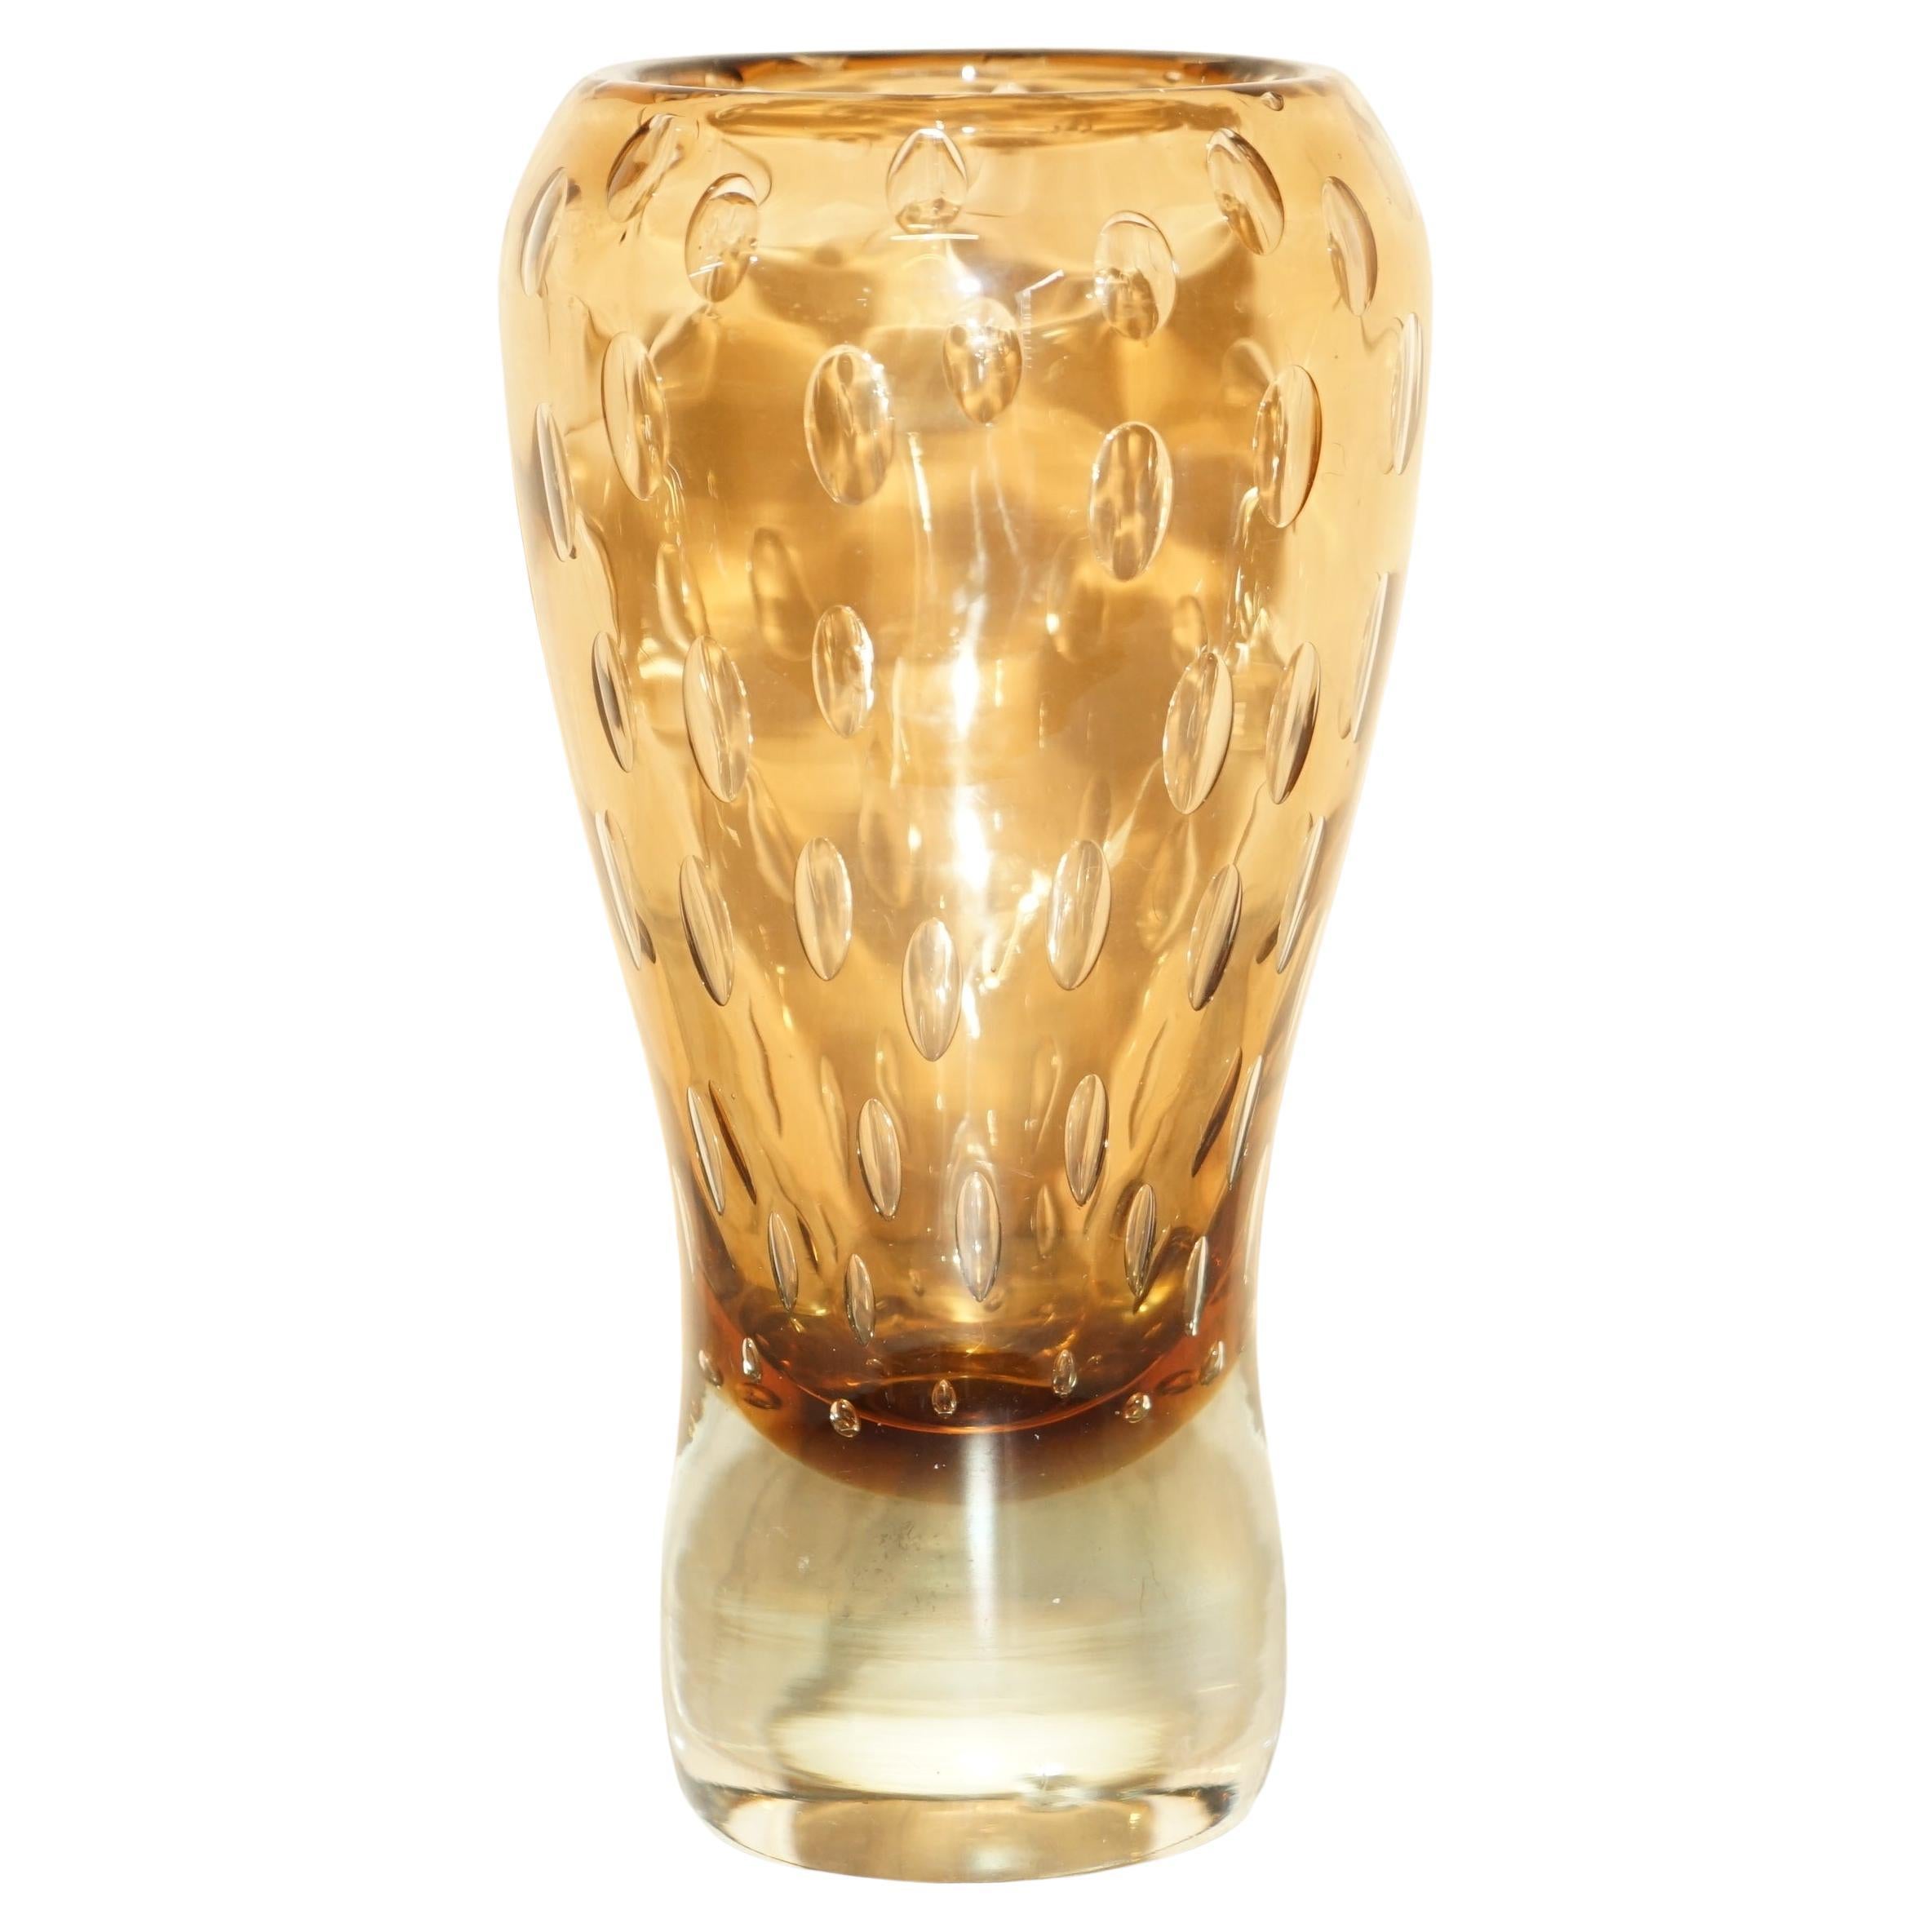 Beautiful Decorative Custom Made Decorative Glass Vase with Air Bubble Design For Sale